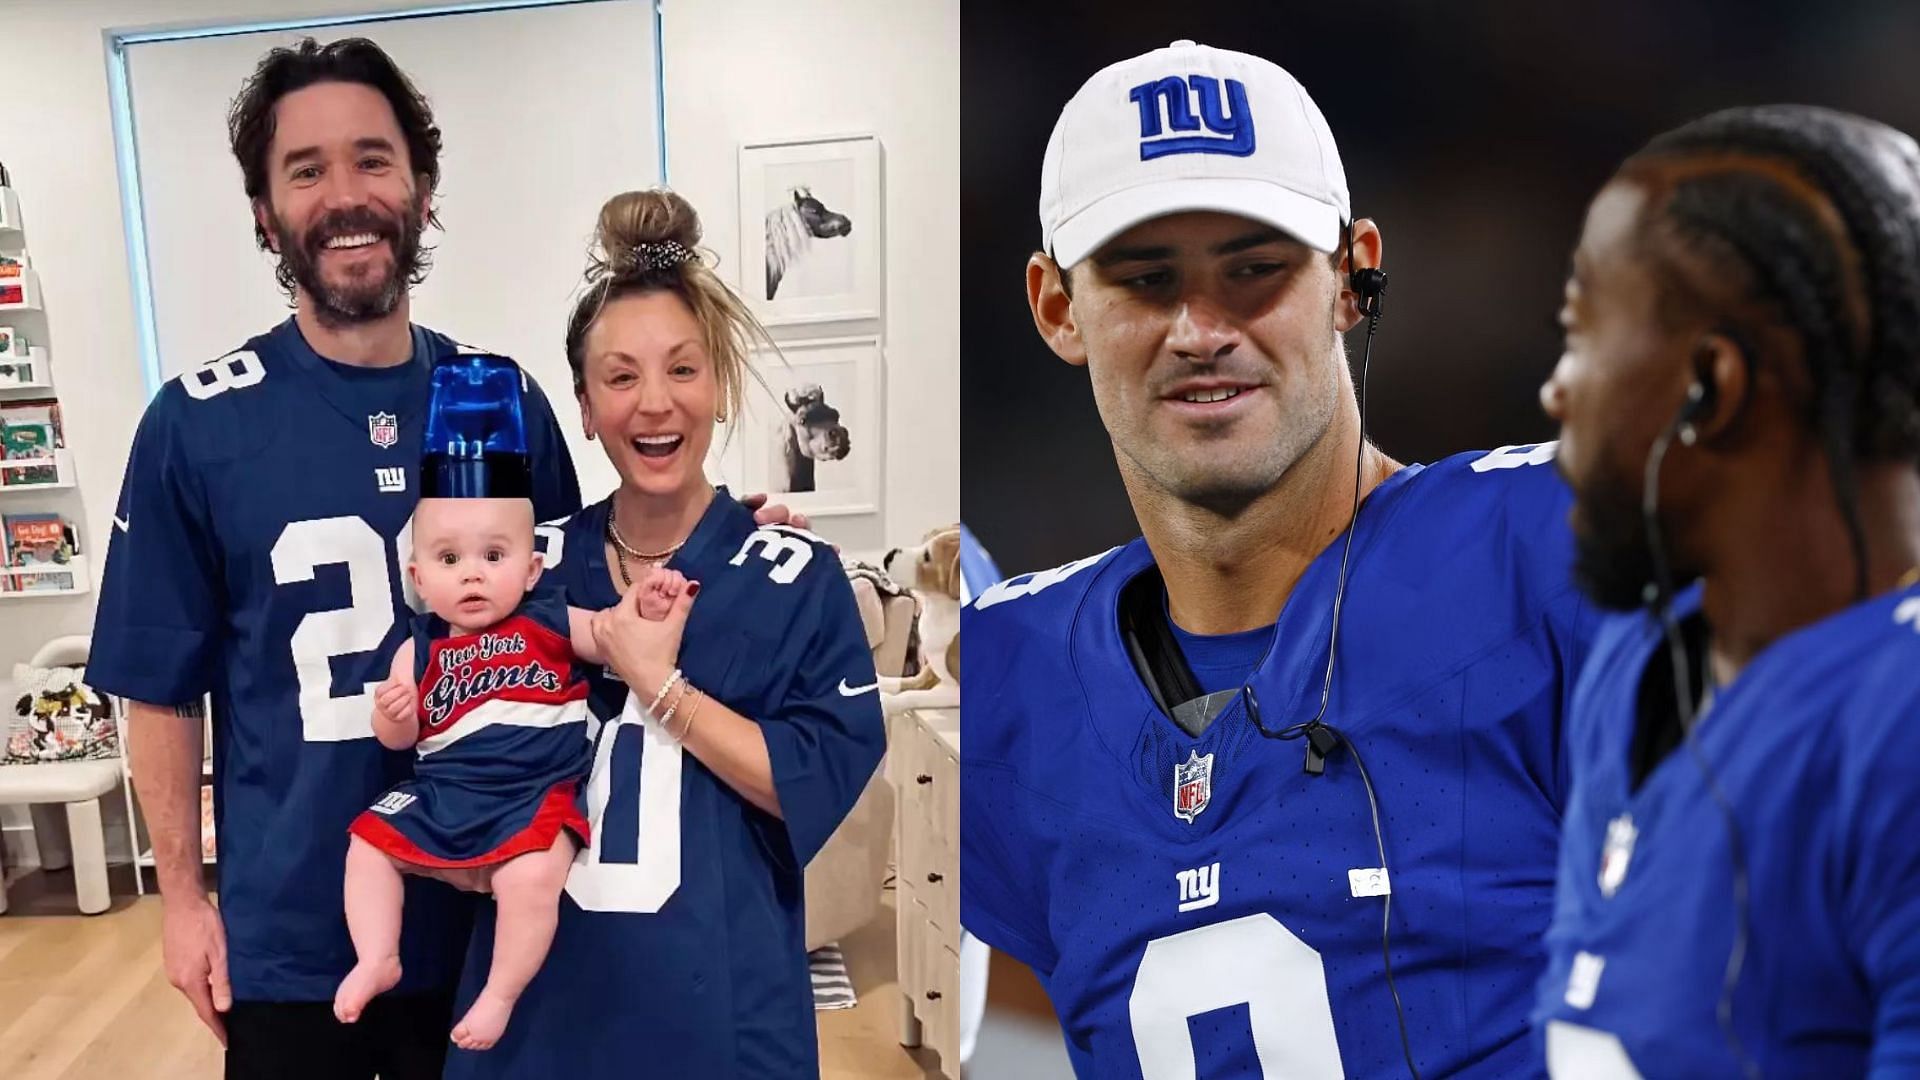 Kaley Cuoco and her family wearing Giants jerseys